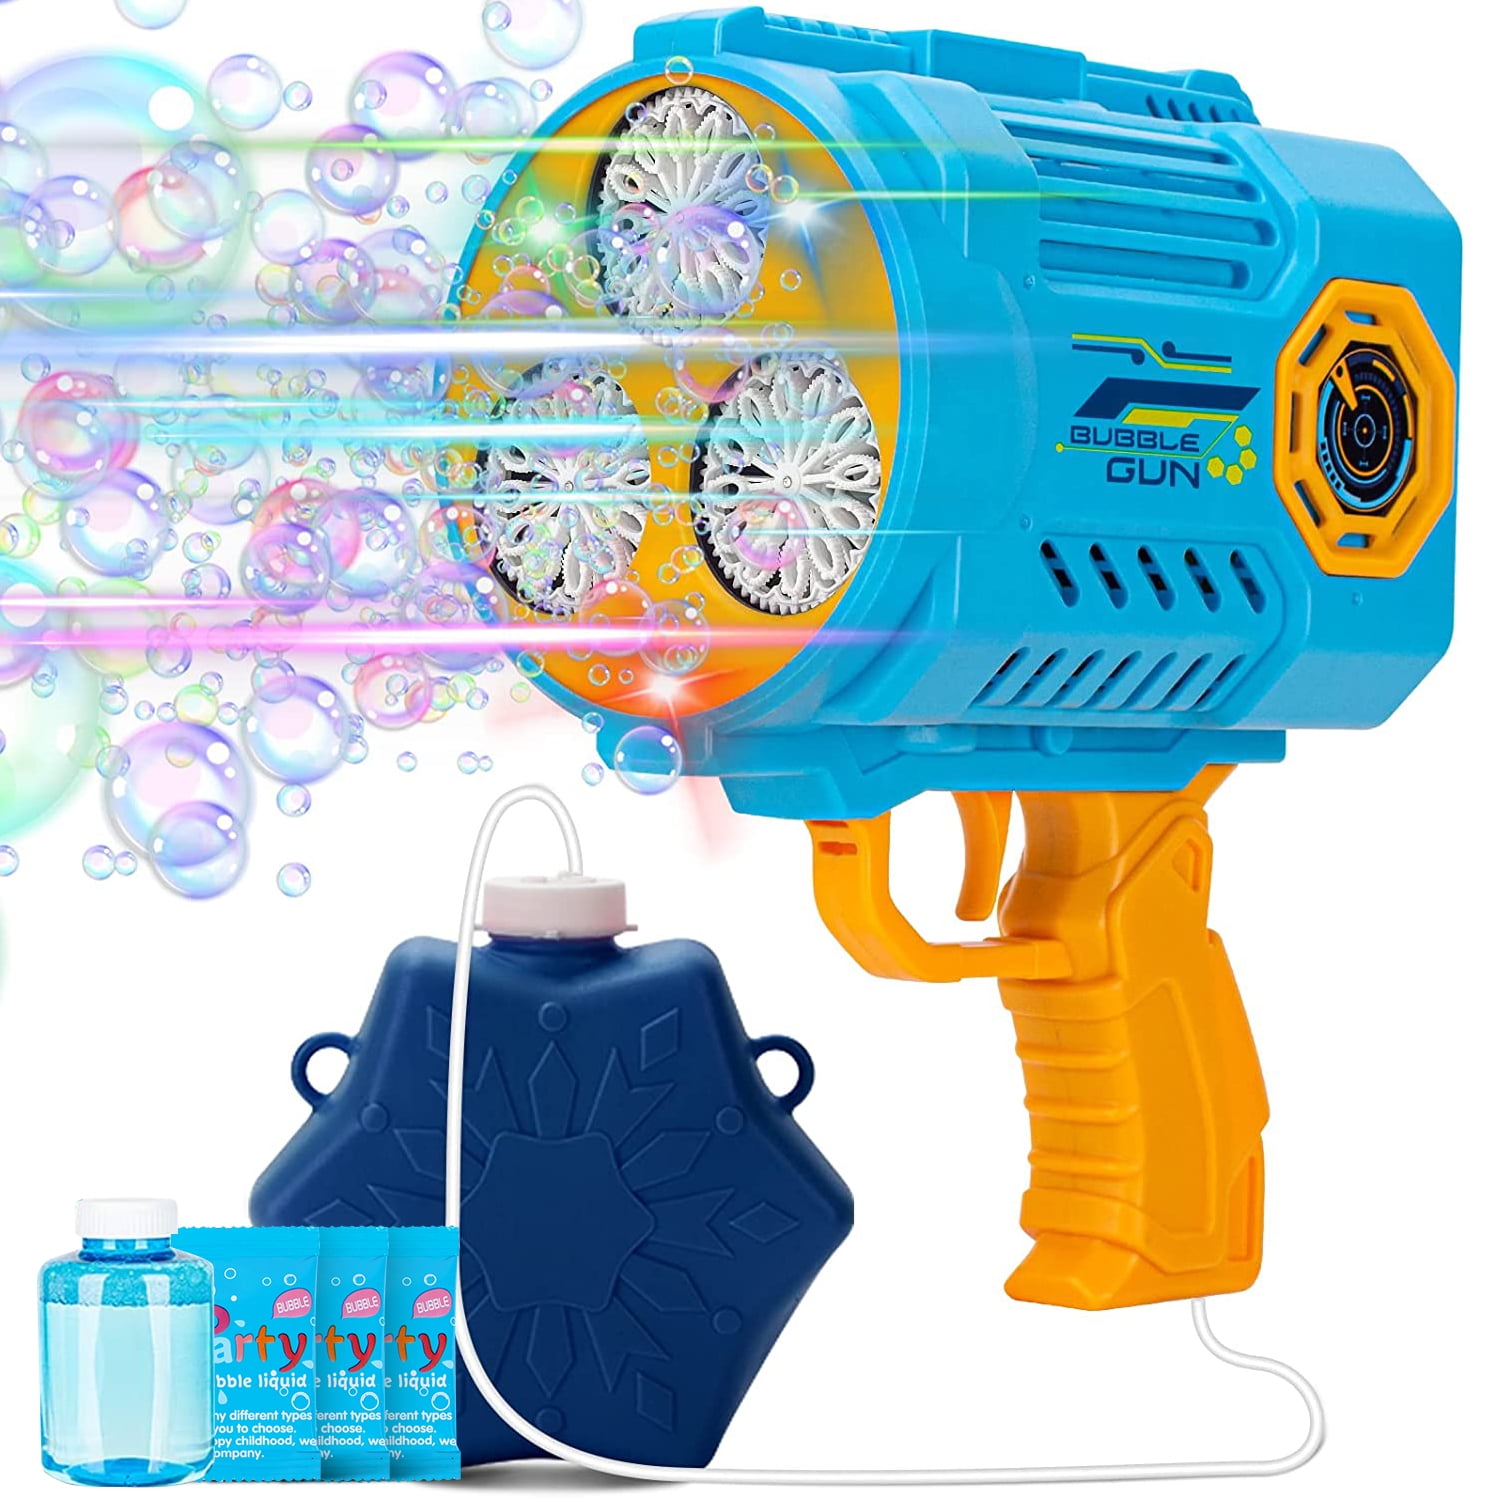 Bubble Guns Outdoor Kids Toys - Automatic Bubble Guns for Kids Ages 4-8  with 20 Packs Bubble Solution, Bubbles Makers Toys Gift for Boys Girls  Summer